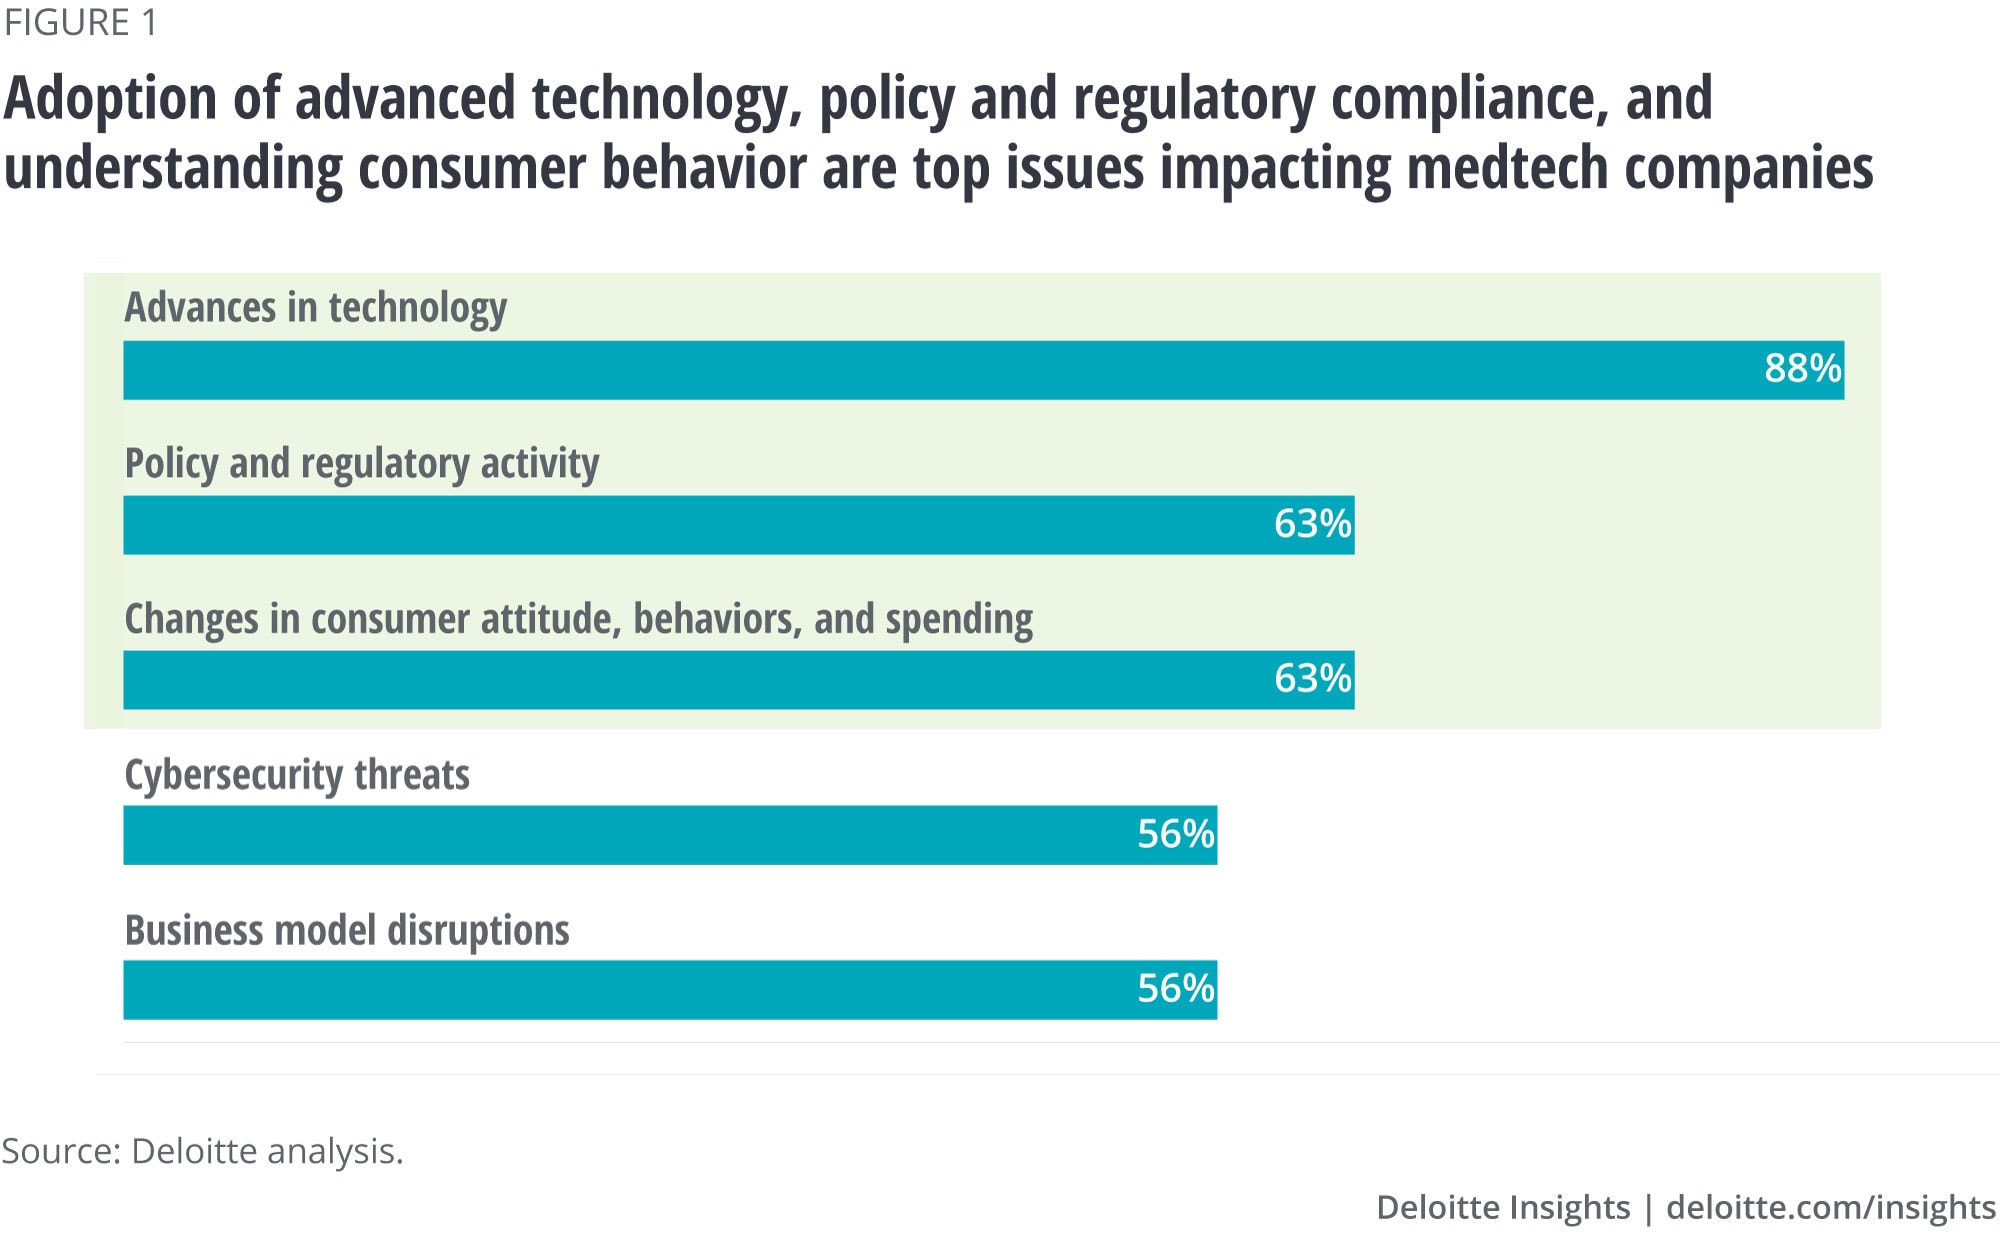 Survey finds advanced technology the top issue facing medtech, followed by policy and regulatory compliance and understanding consumer behavior